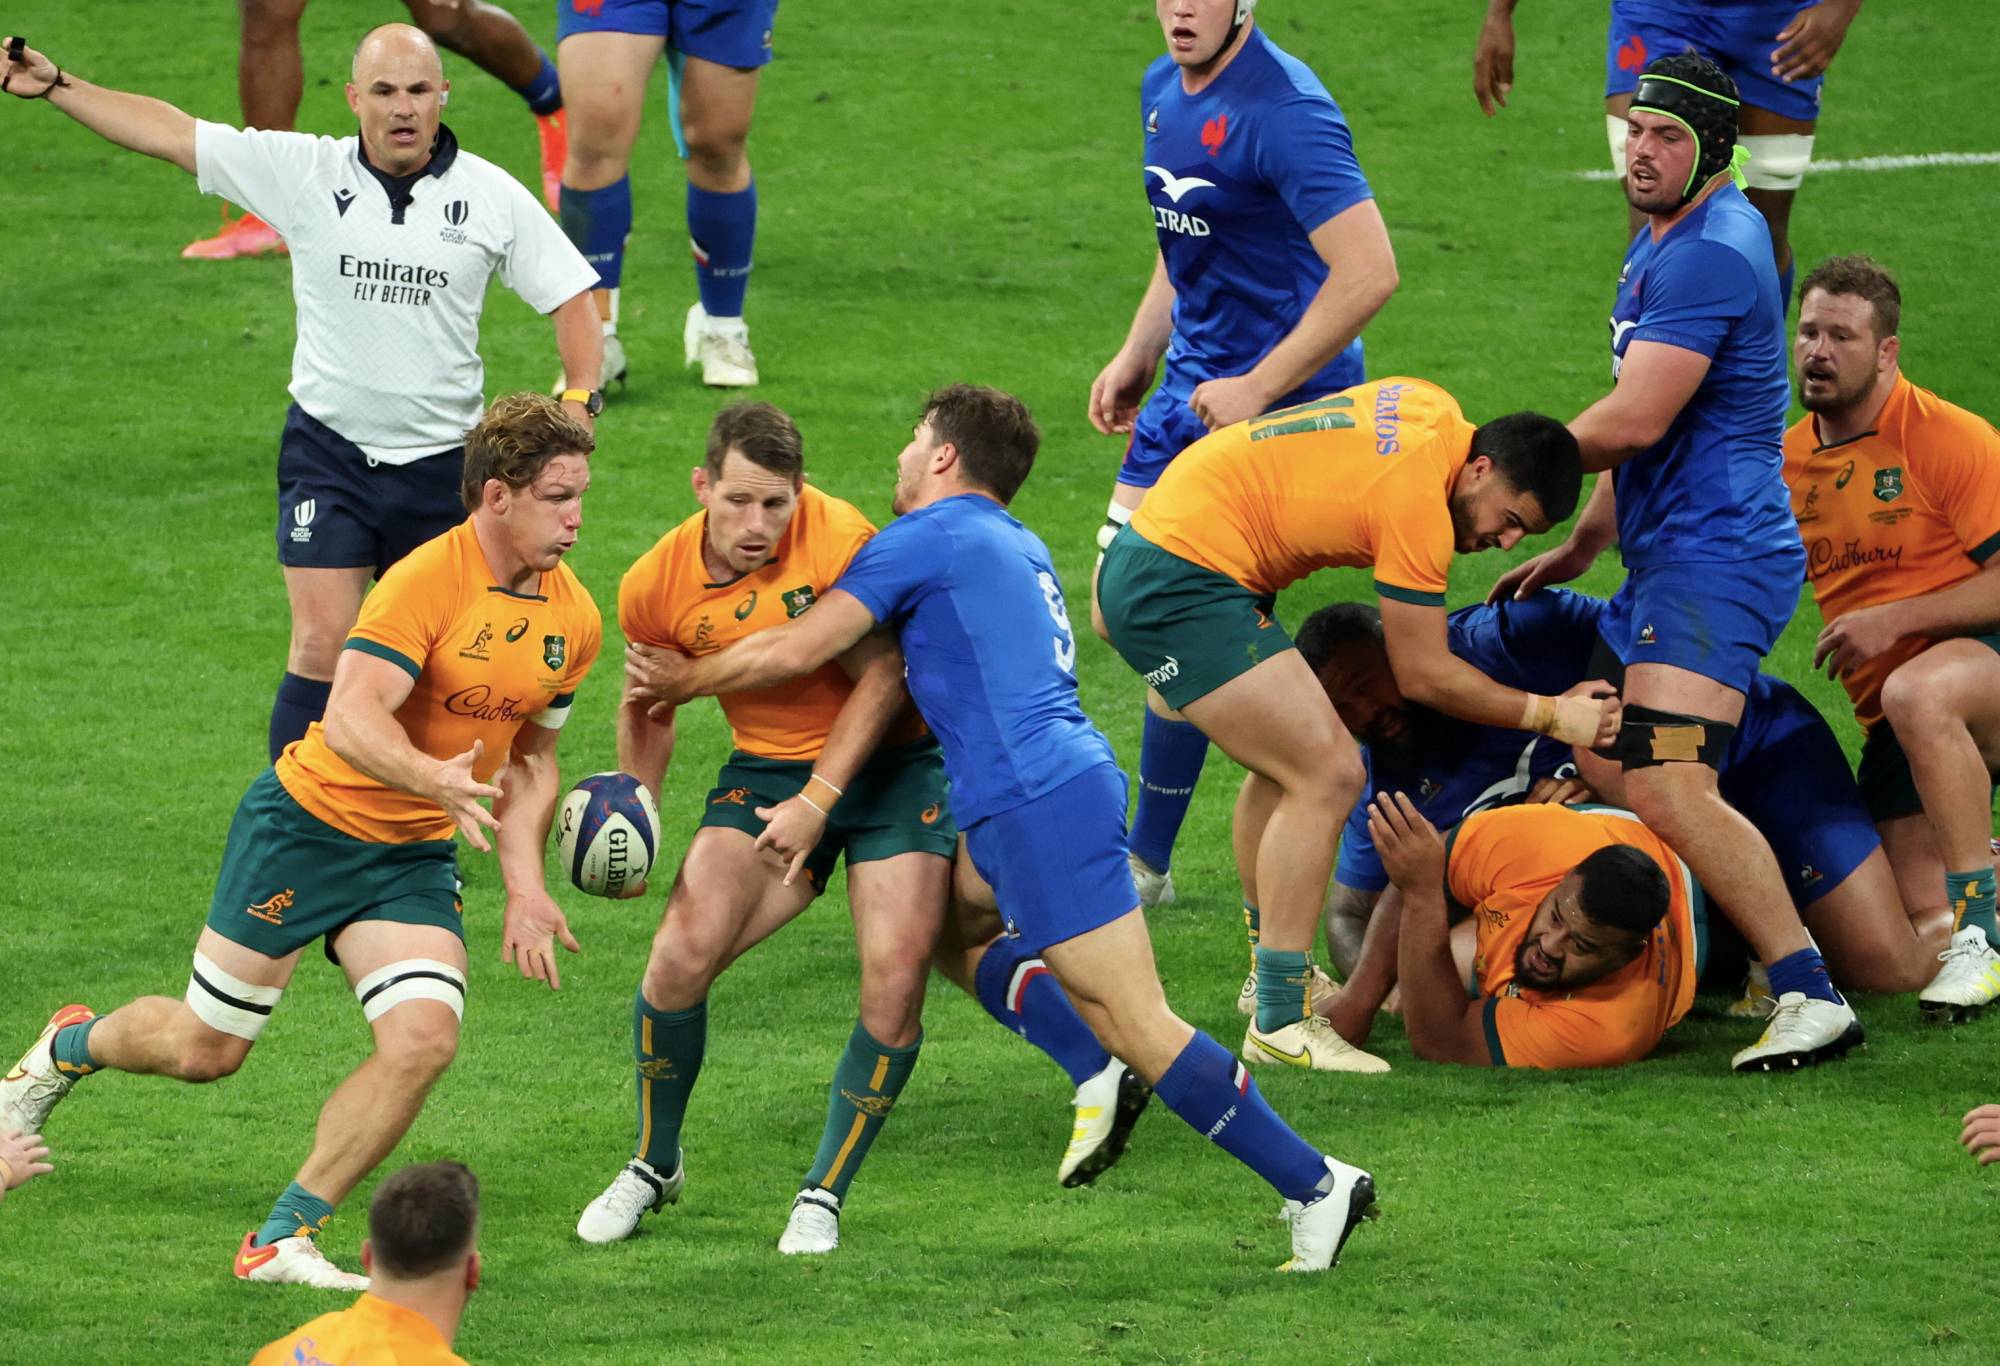 Michael Hooper #7 and Bernard Foley #10 of Team Australia in action with Antoine Dupont #9 of Team rance during the Autumn Tour match between France and Australia at Stade de France on November 05, 2022 in Paris, France. (Photo by Xavier Laine/Getty Images)